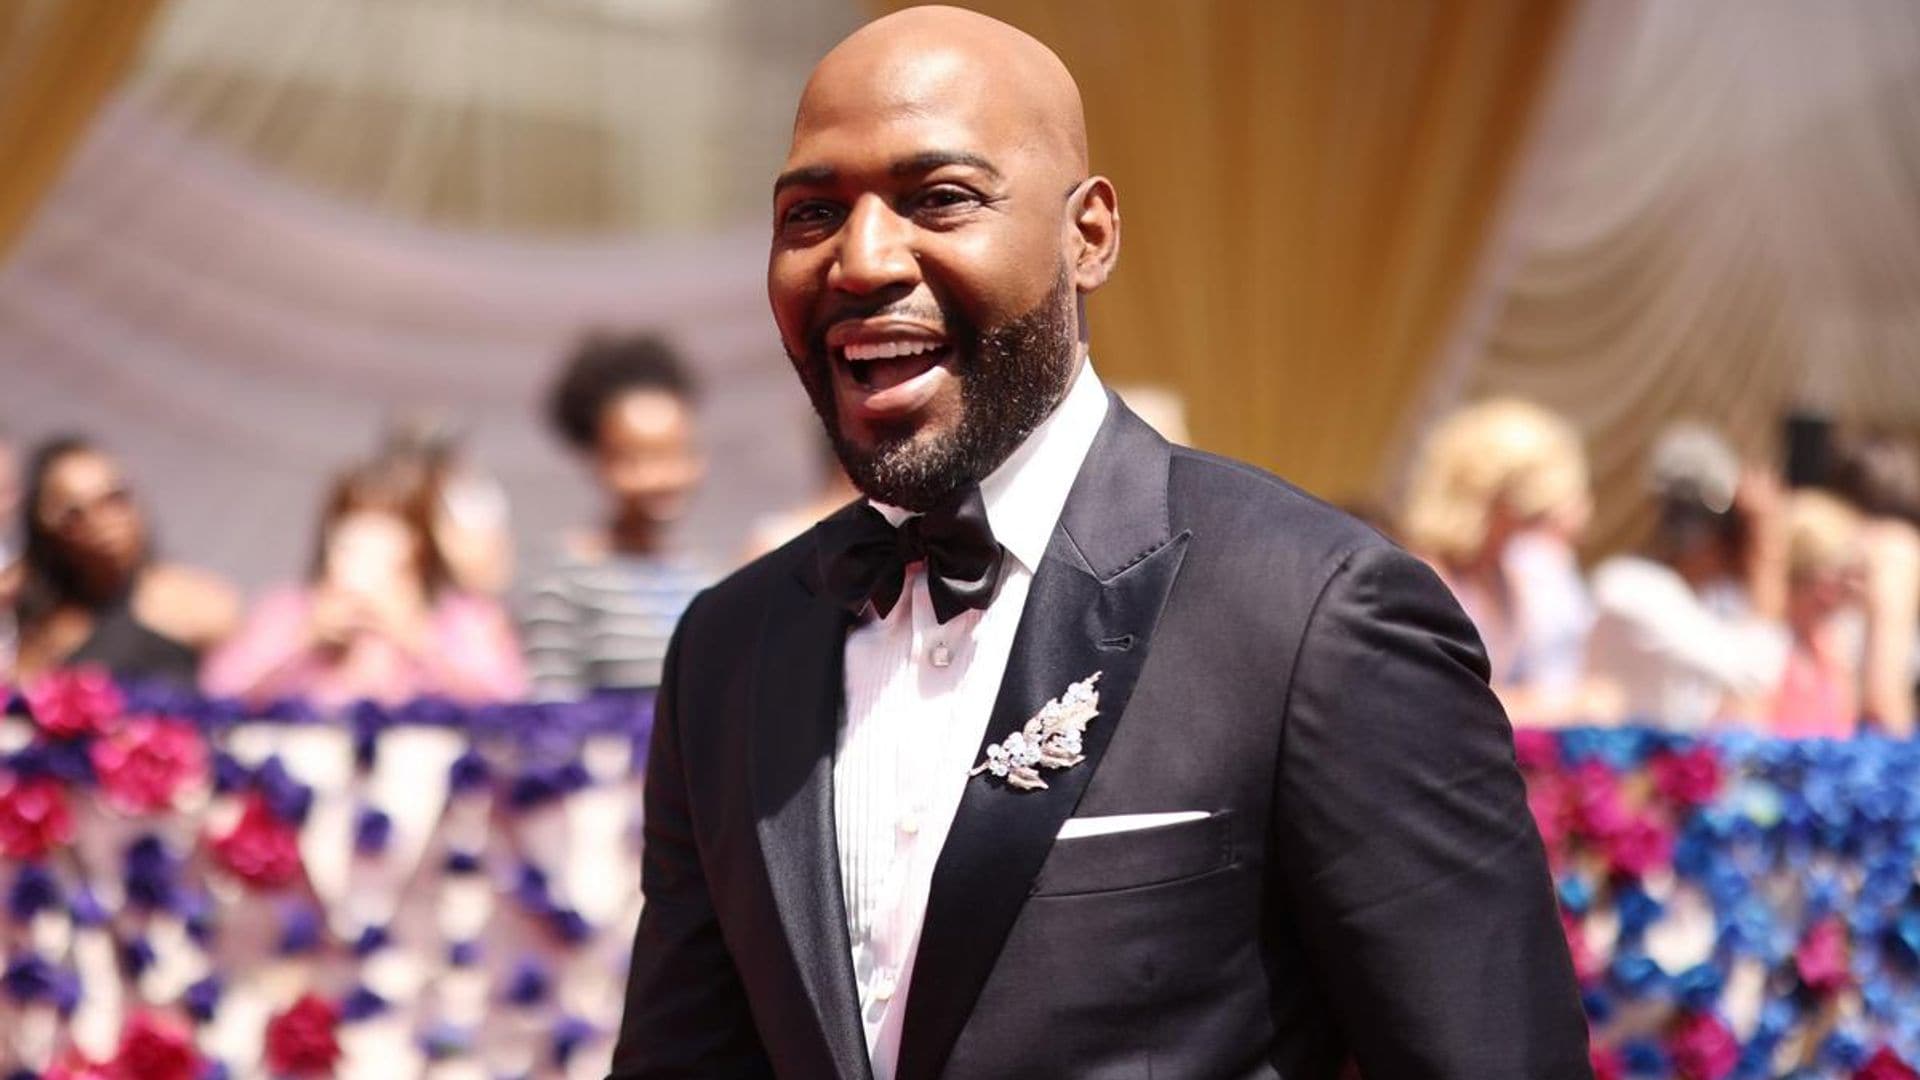 Karamo Brown becomes the first Queer Afro-Latino in the US with a daytime talk show